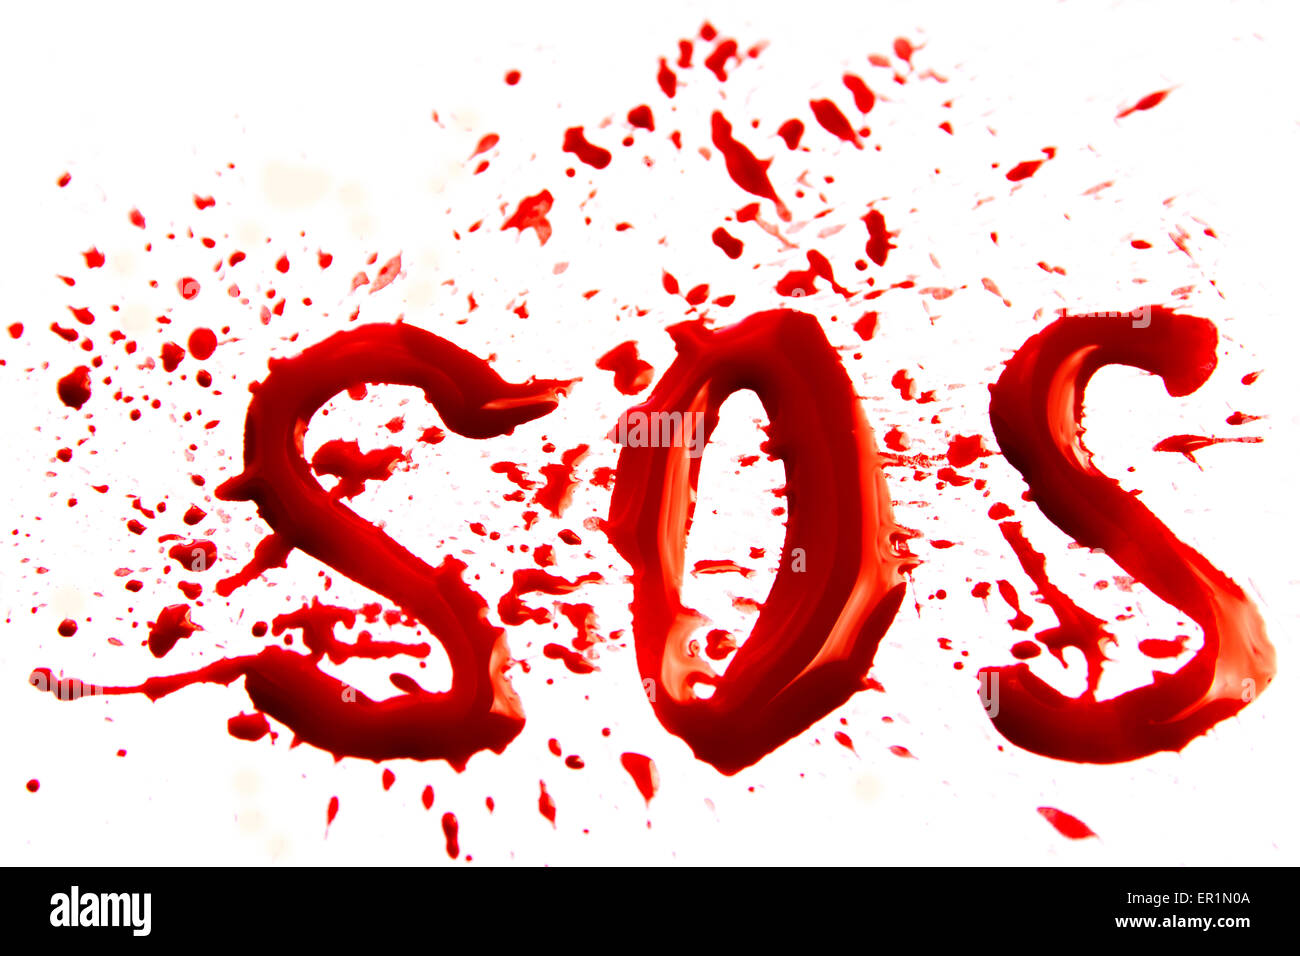 Bloody word SOS with splatter, droplets, stains isolated on white background Stock Photo